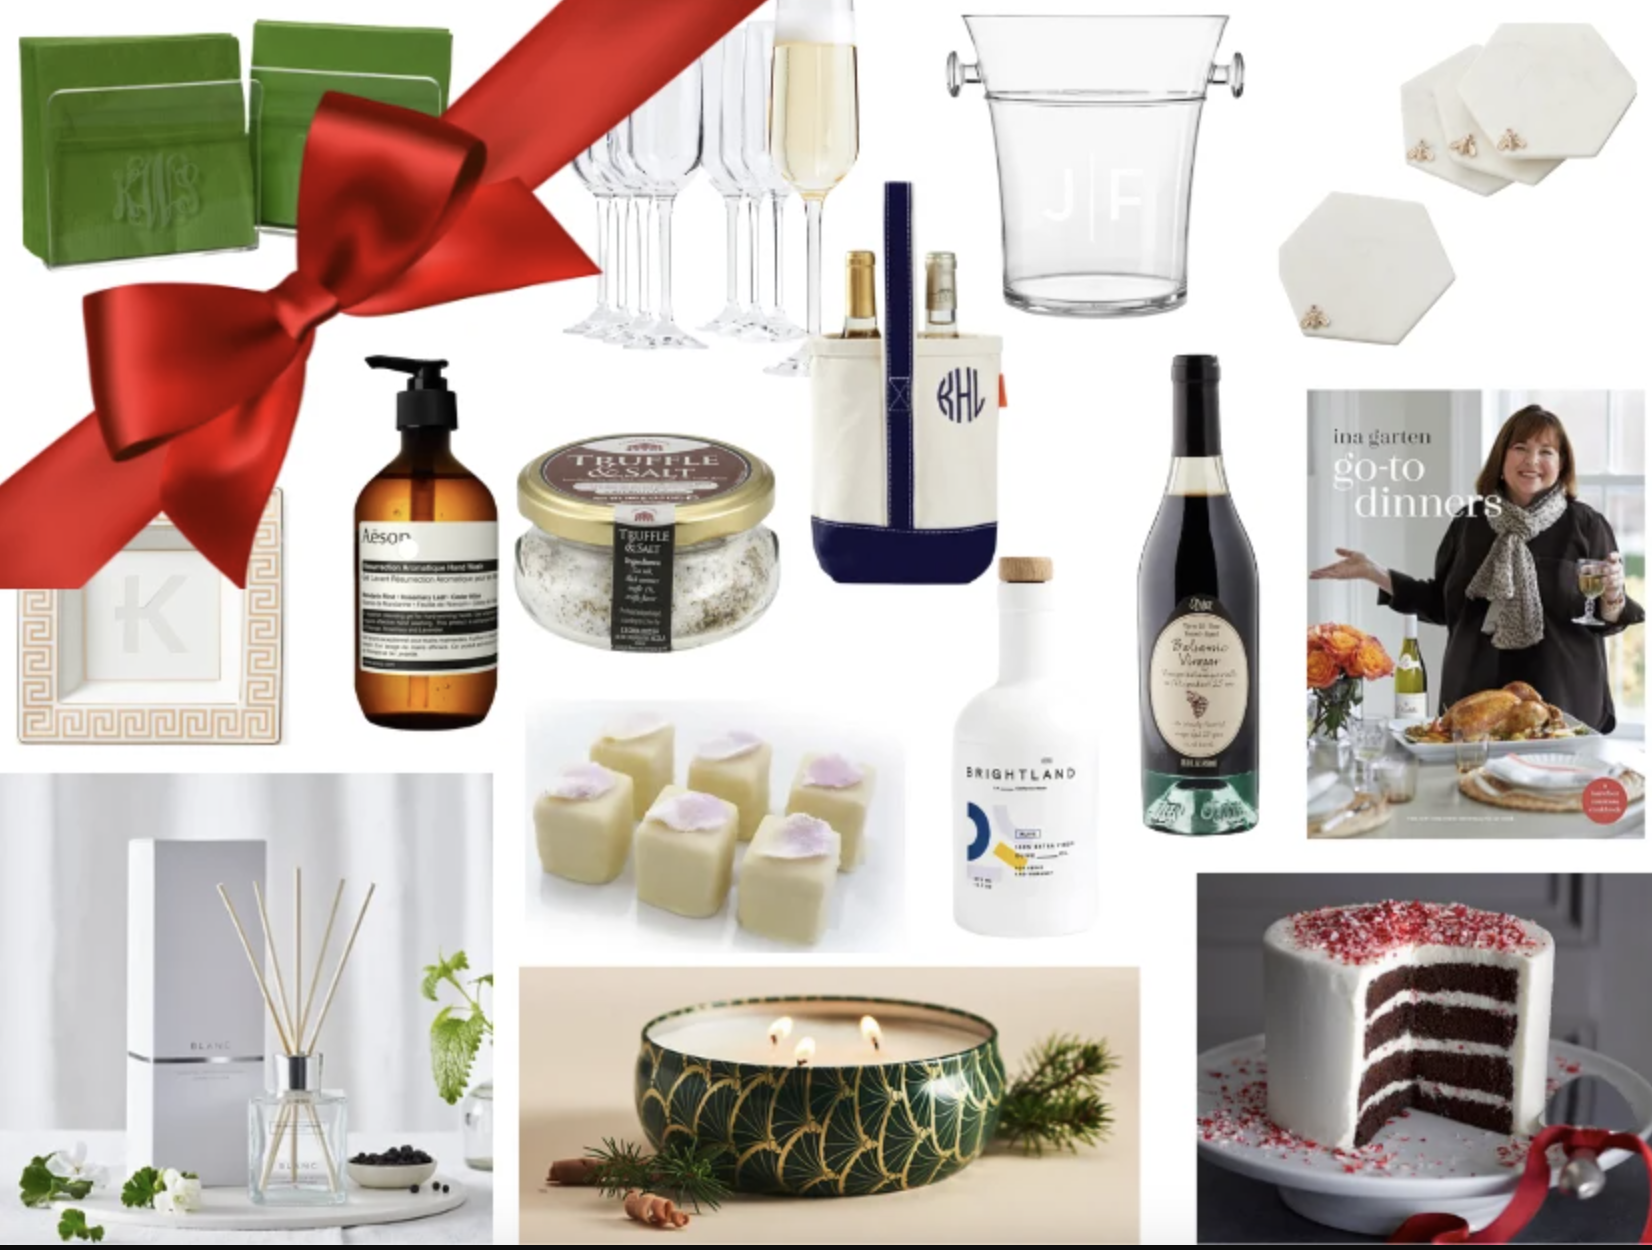 15 Thoughtful Hostess Gifts for the Holiday Season